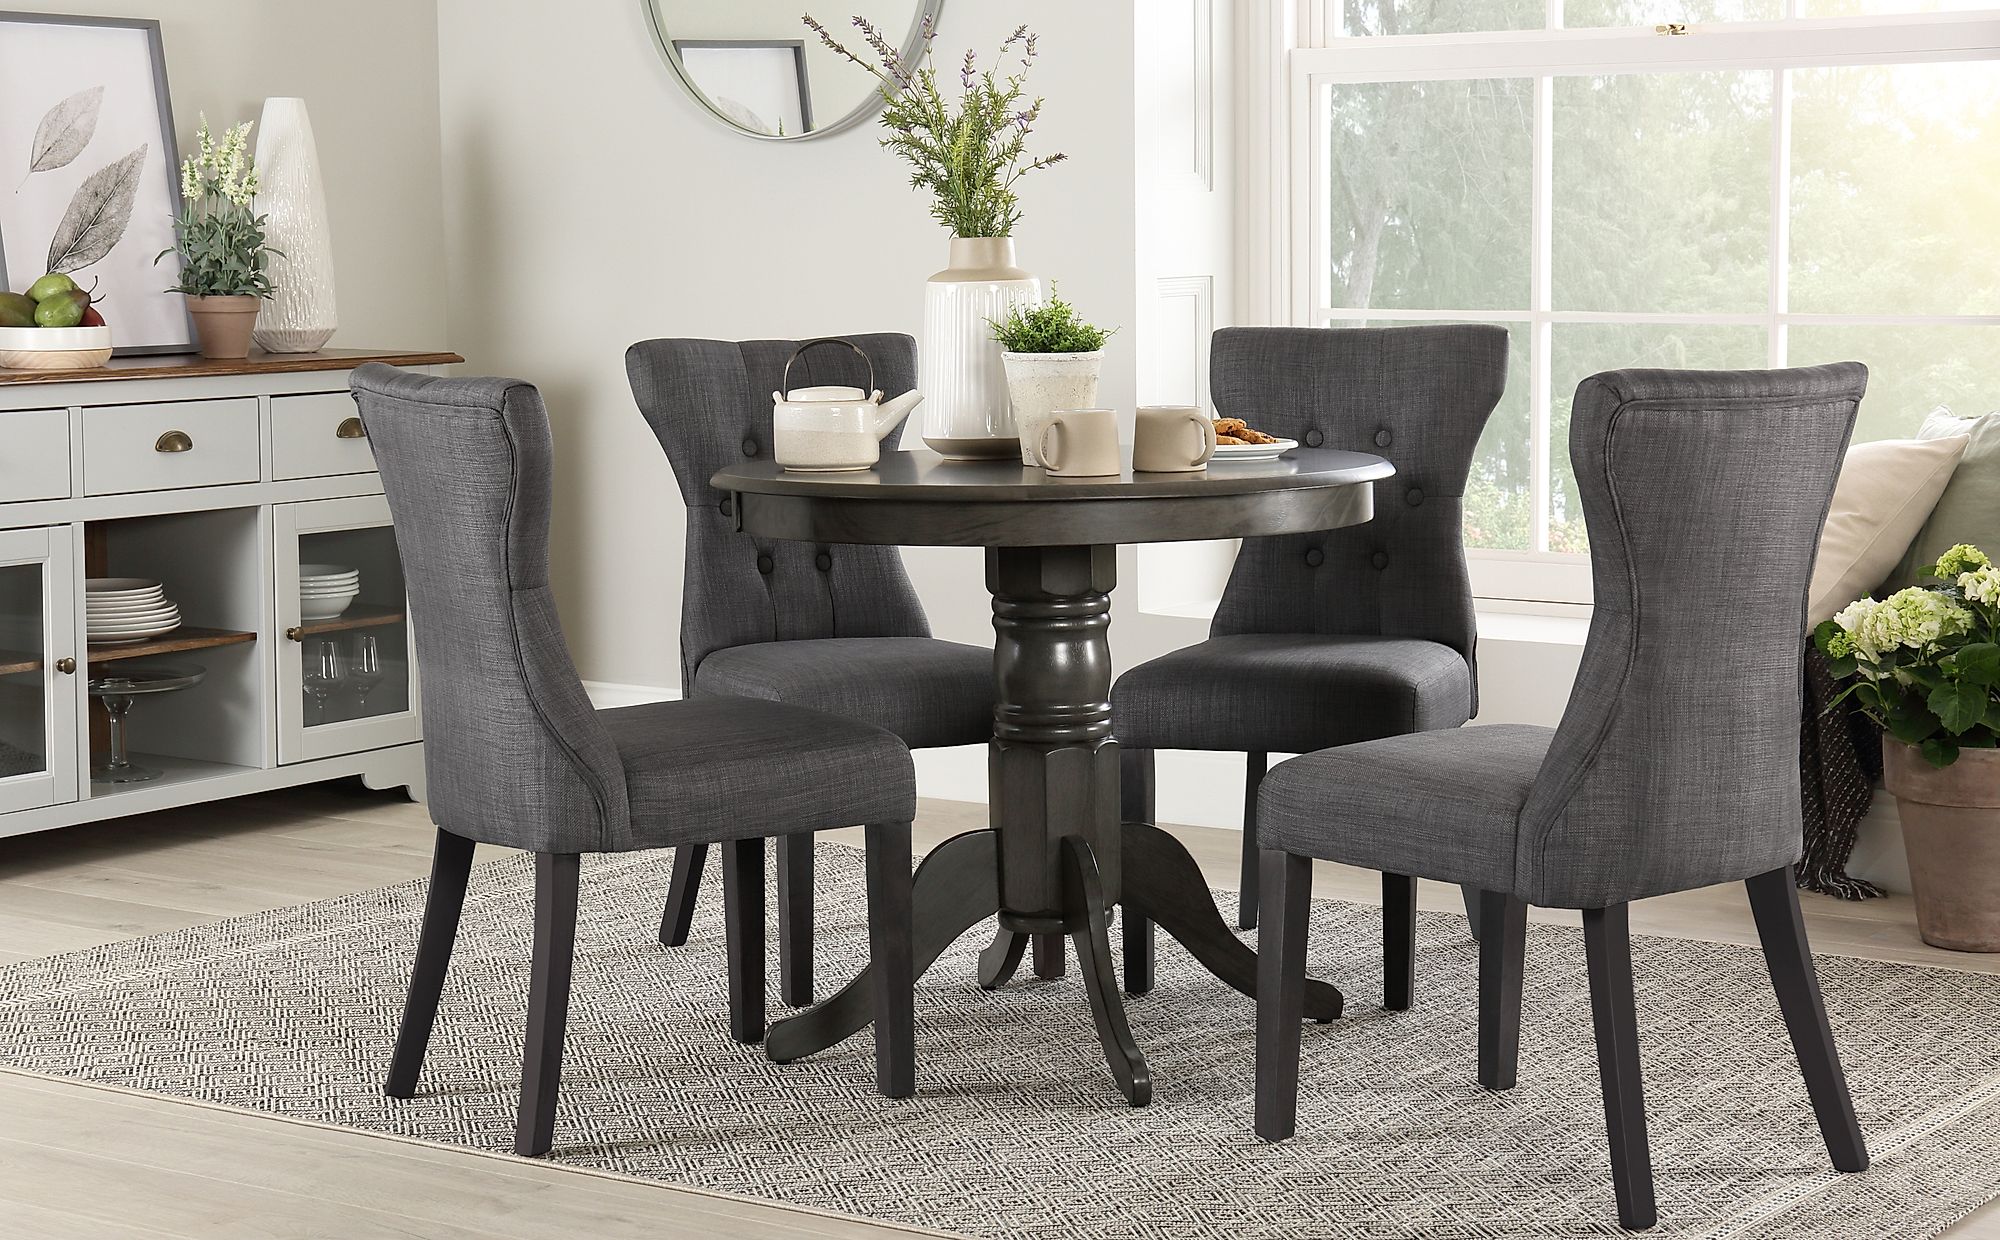 Grey Round Dining Room Table And Chairs